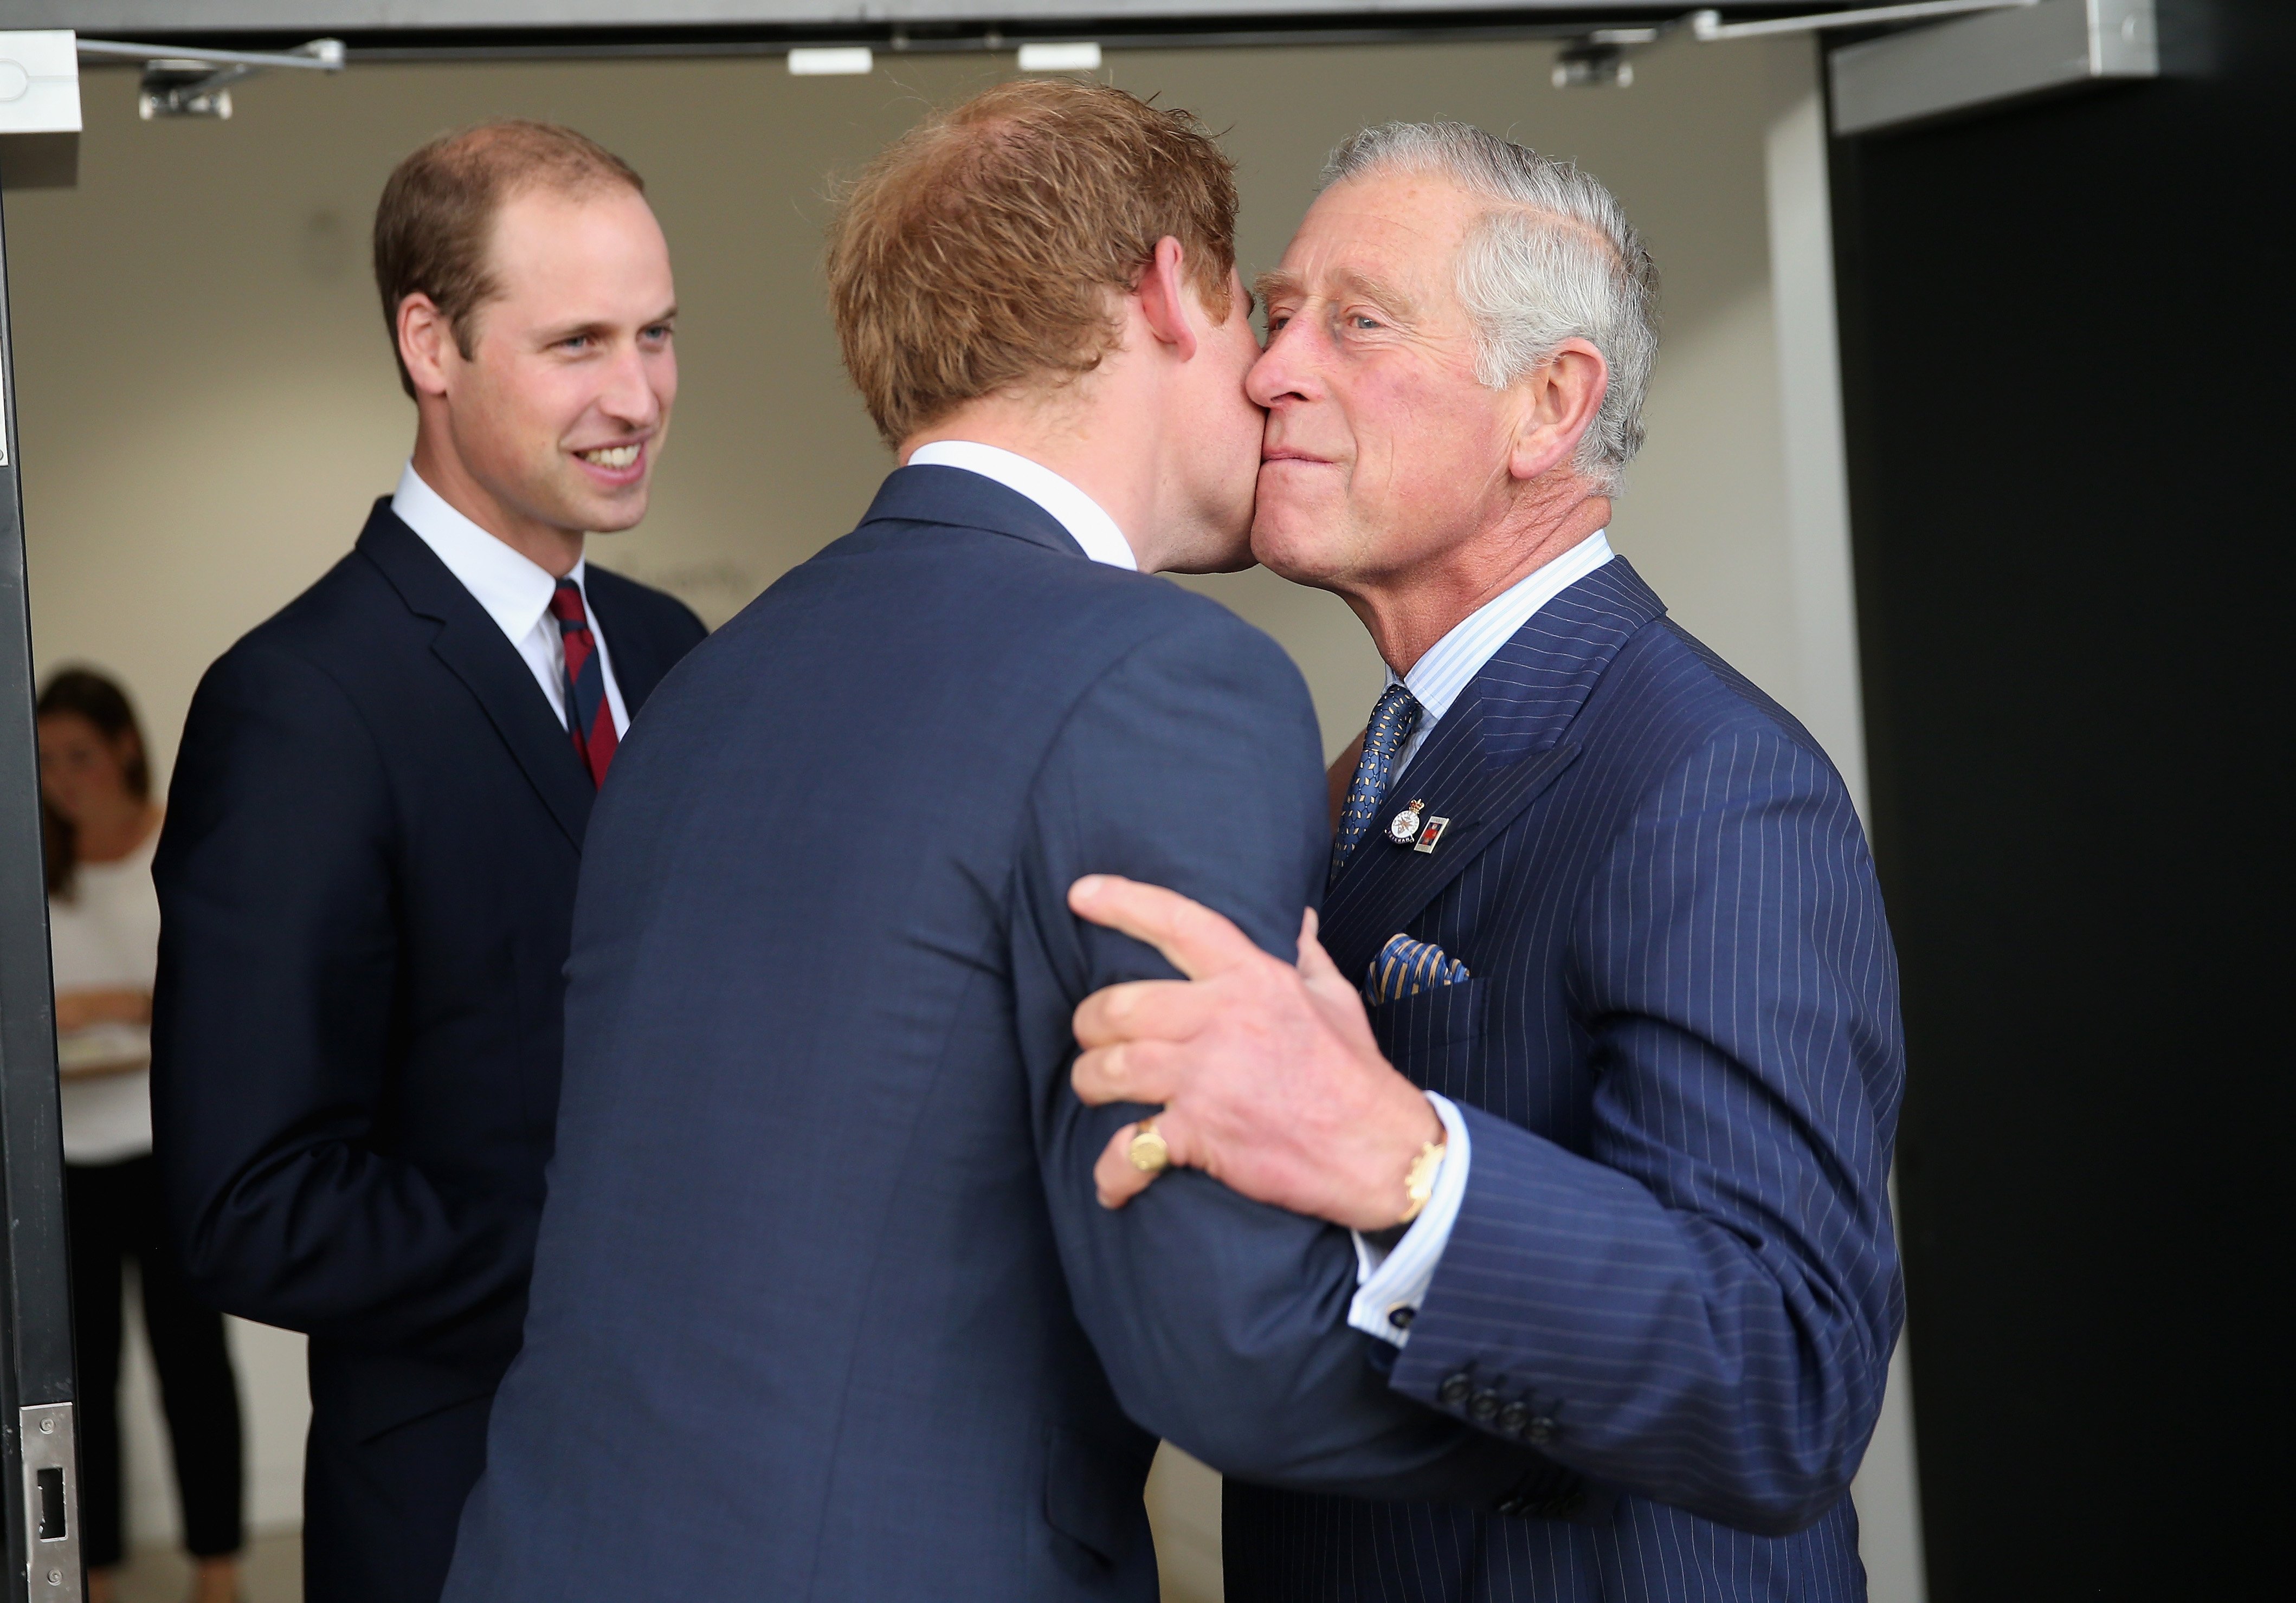 Prince William, Prince Charles, and Prince Harry ahead of the Invictus Games Opening Ceremony at Queen Elizabeth II Park on September 10, 2014, in London, England | Source: Getty Images